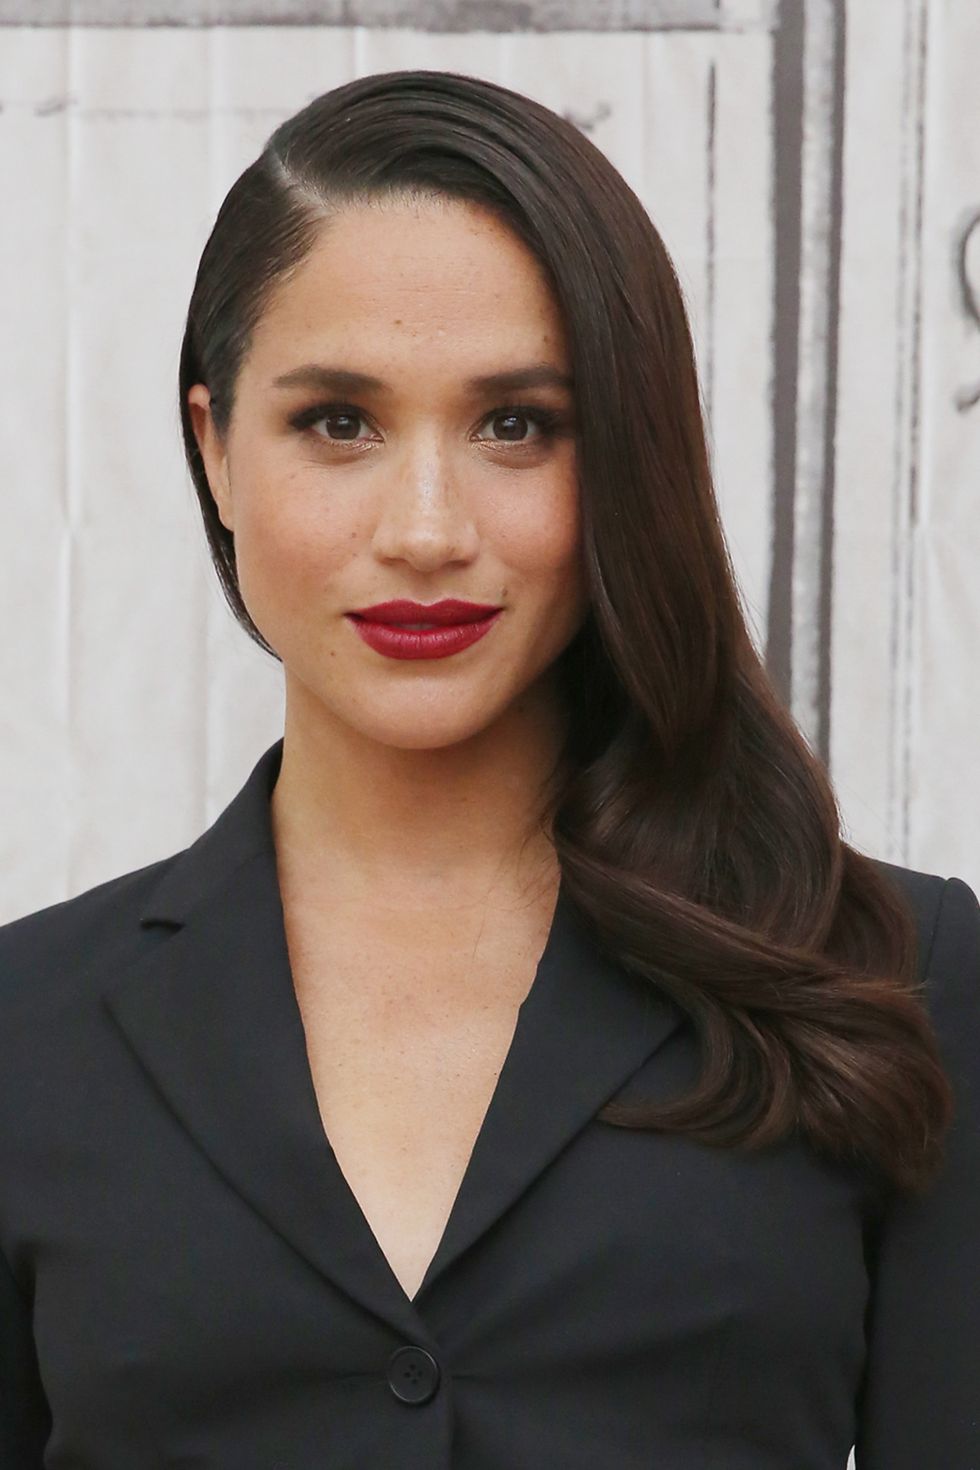 Meghan Markle’s signature hairstyles - glam waves